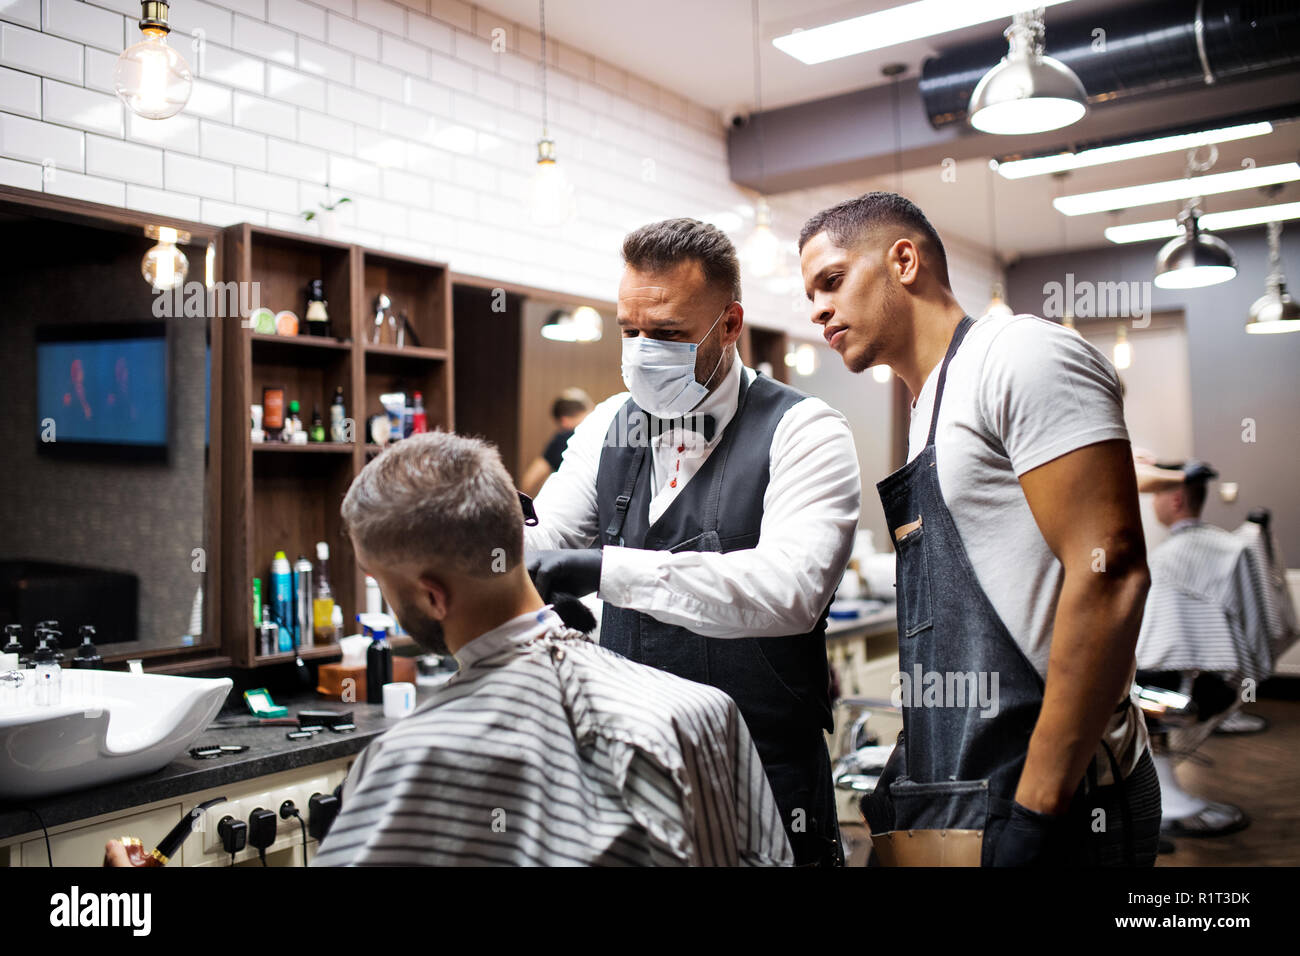 Hipster man client visiting haidresser and hairstylist in barber shop, training concept. Stock Photo